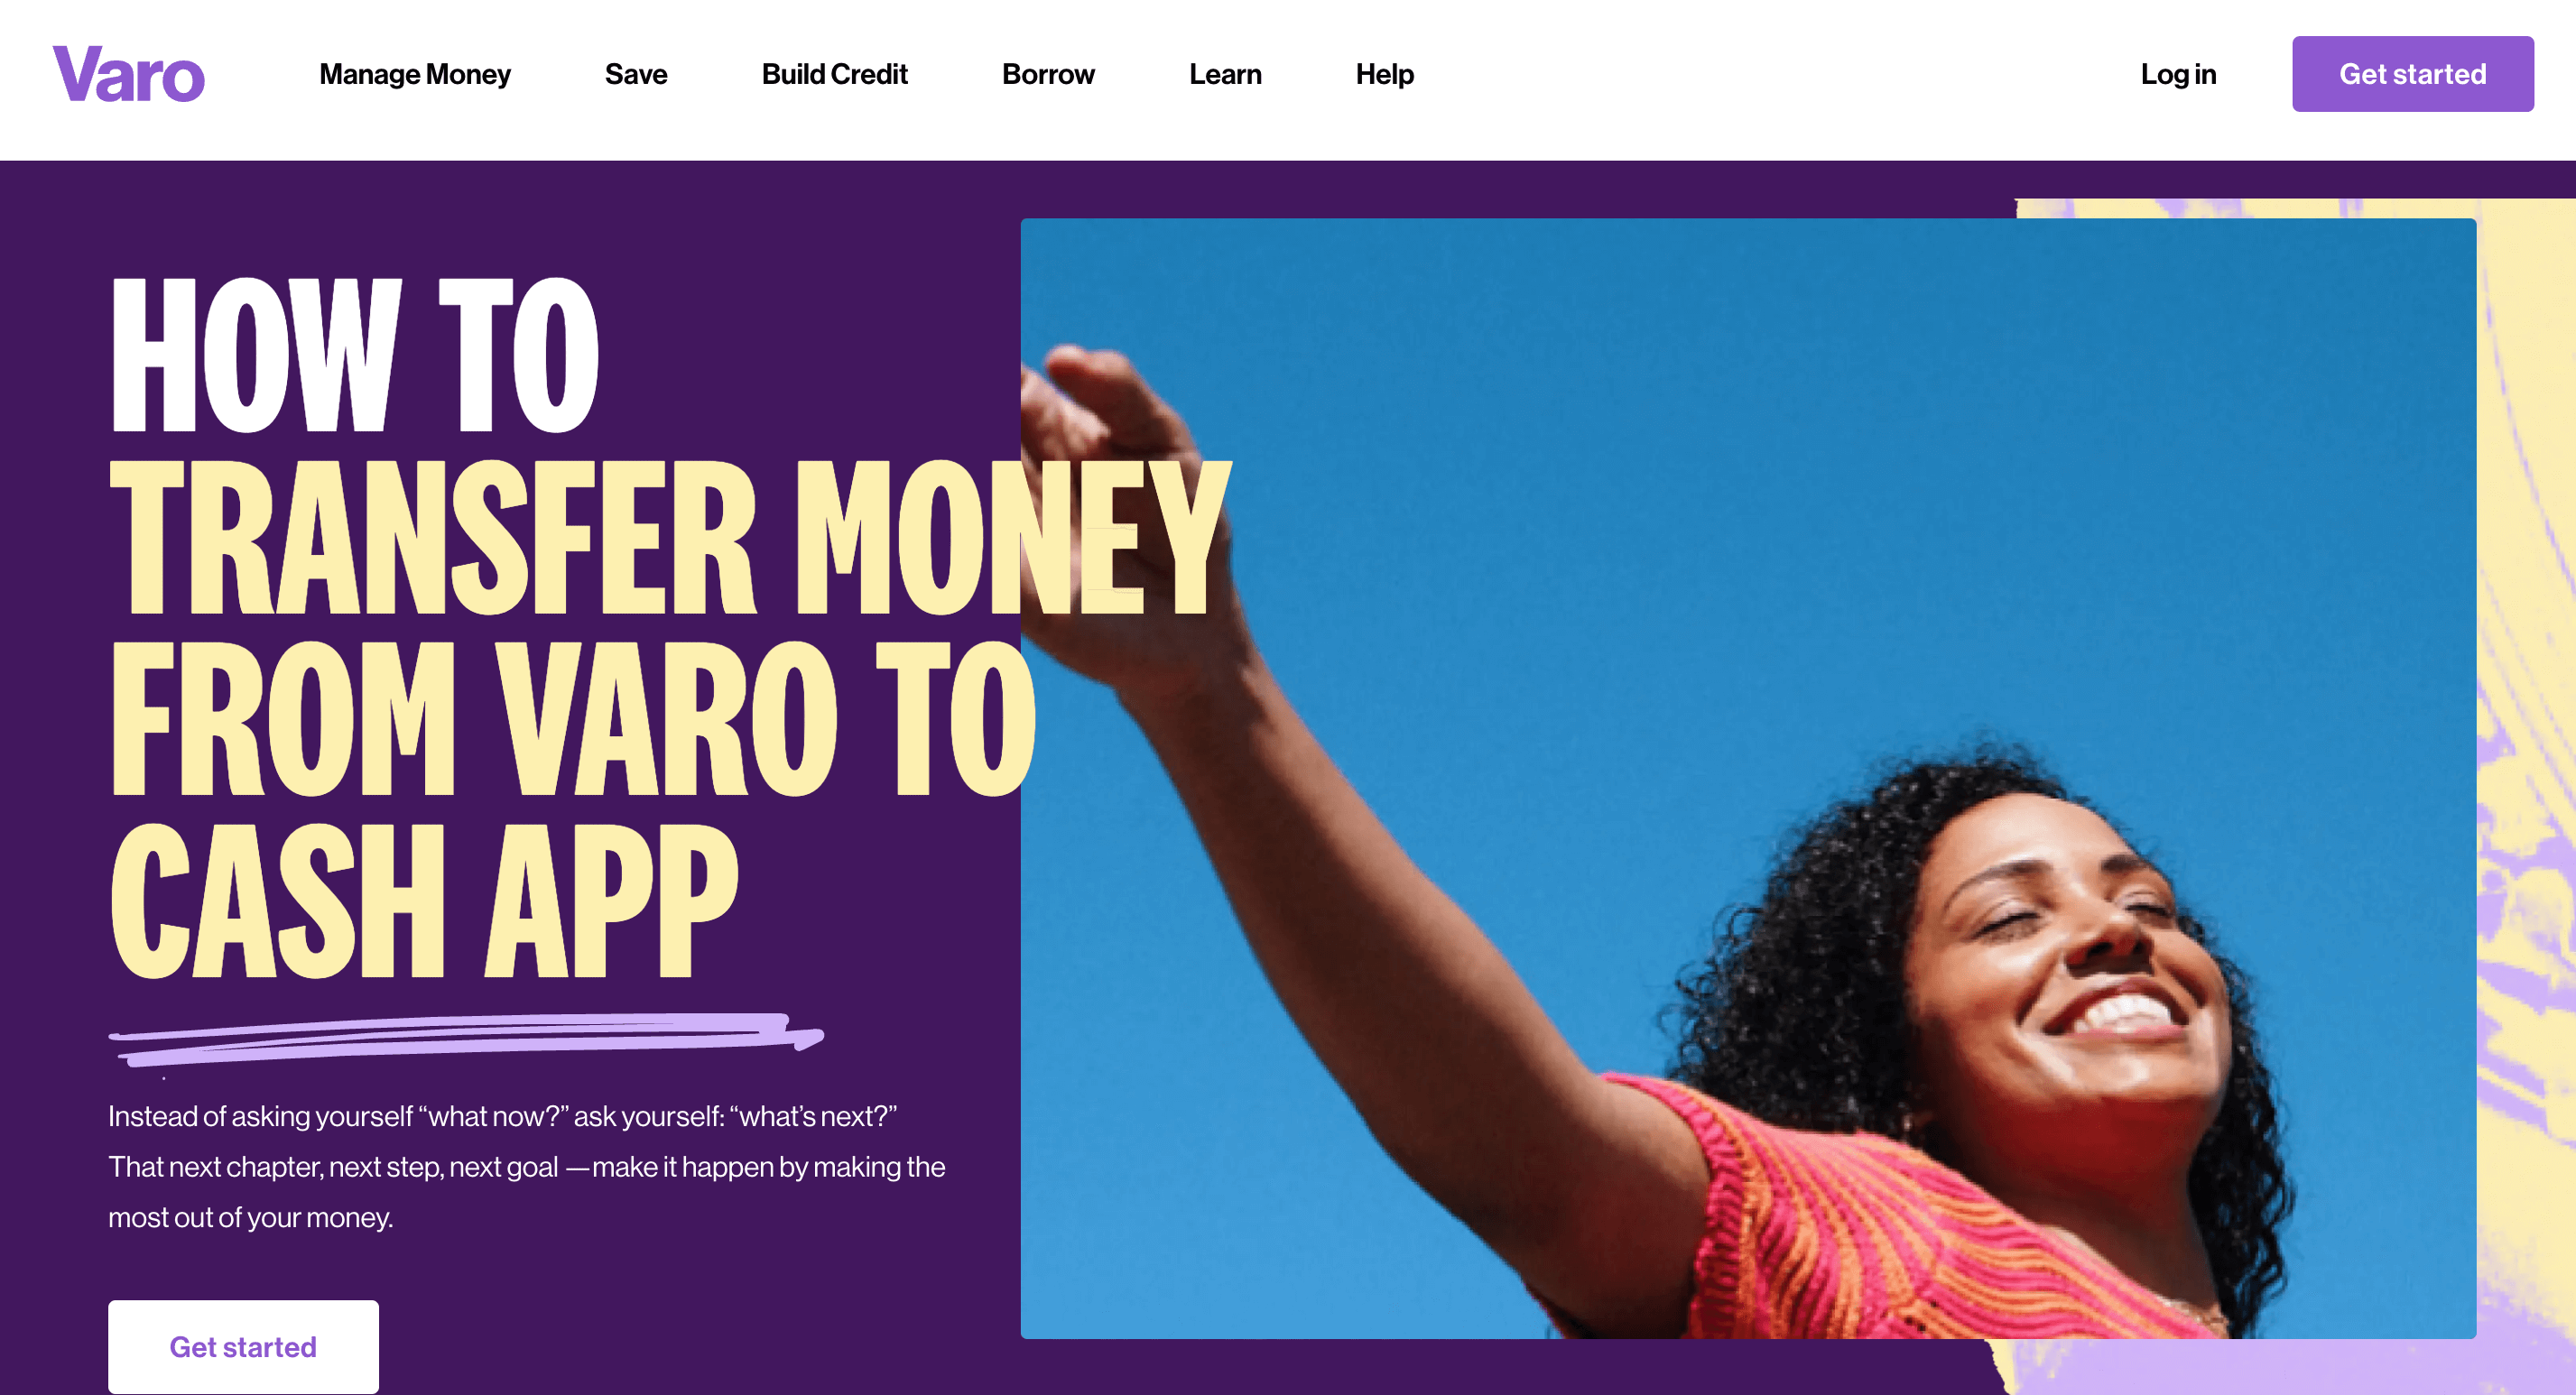 How To Transfer Money From Varo To Cash App